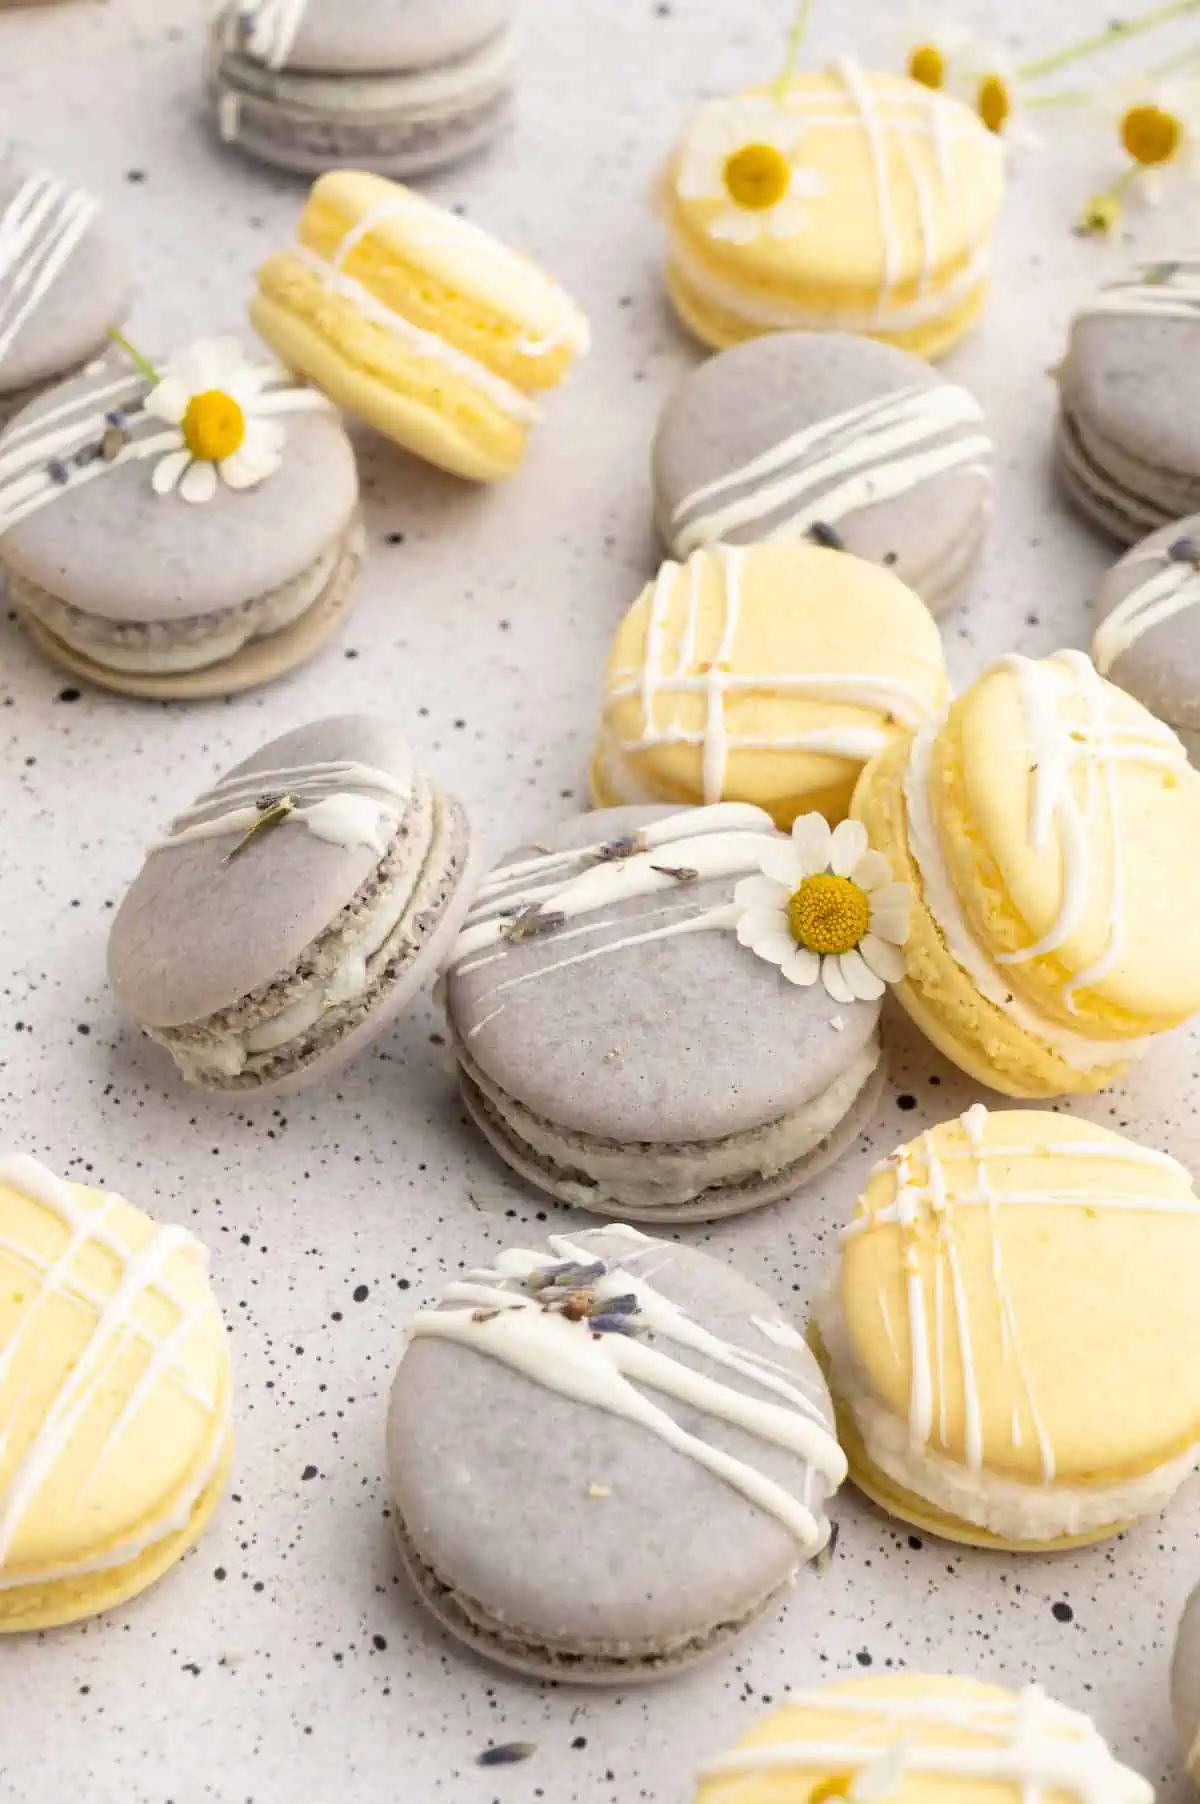 Yellow and purple vegan macarons in a cluster, topped with vegan white chocolate drizzle and edible flowers.